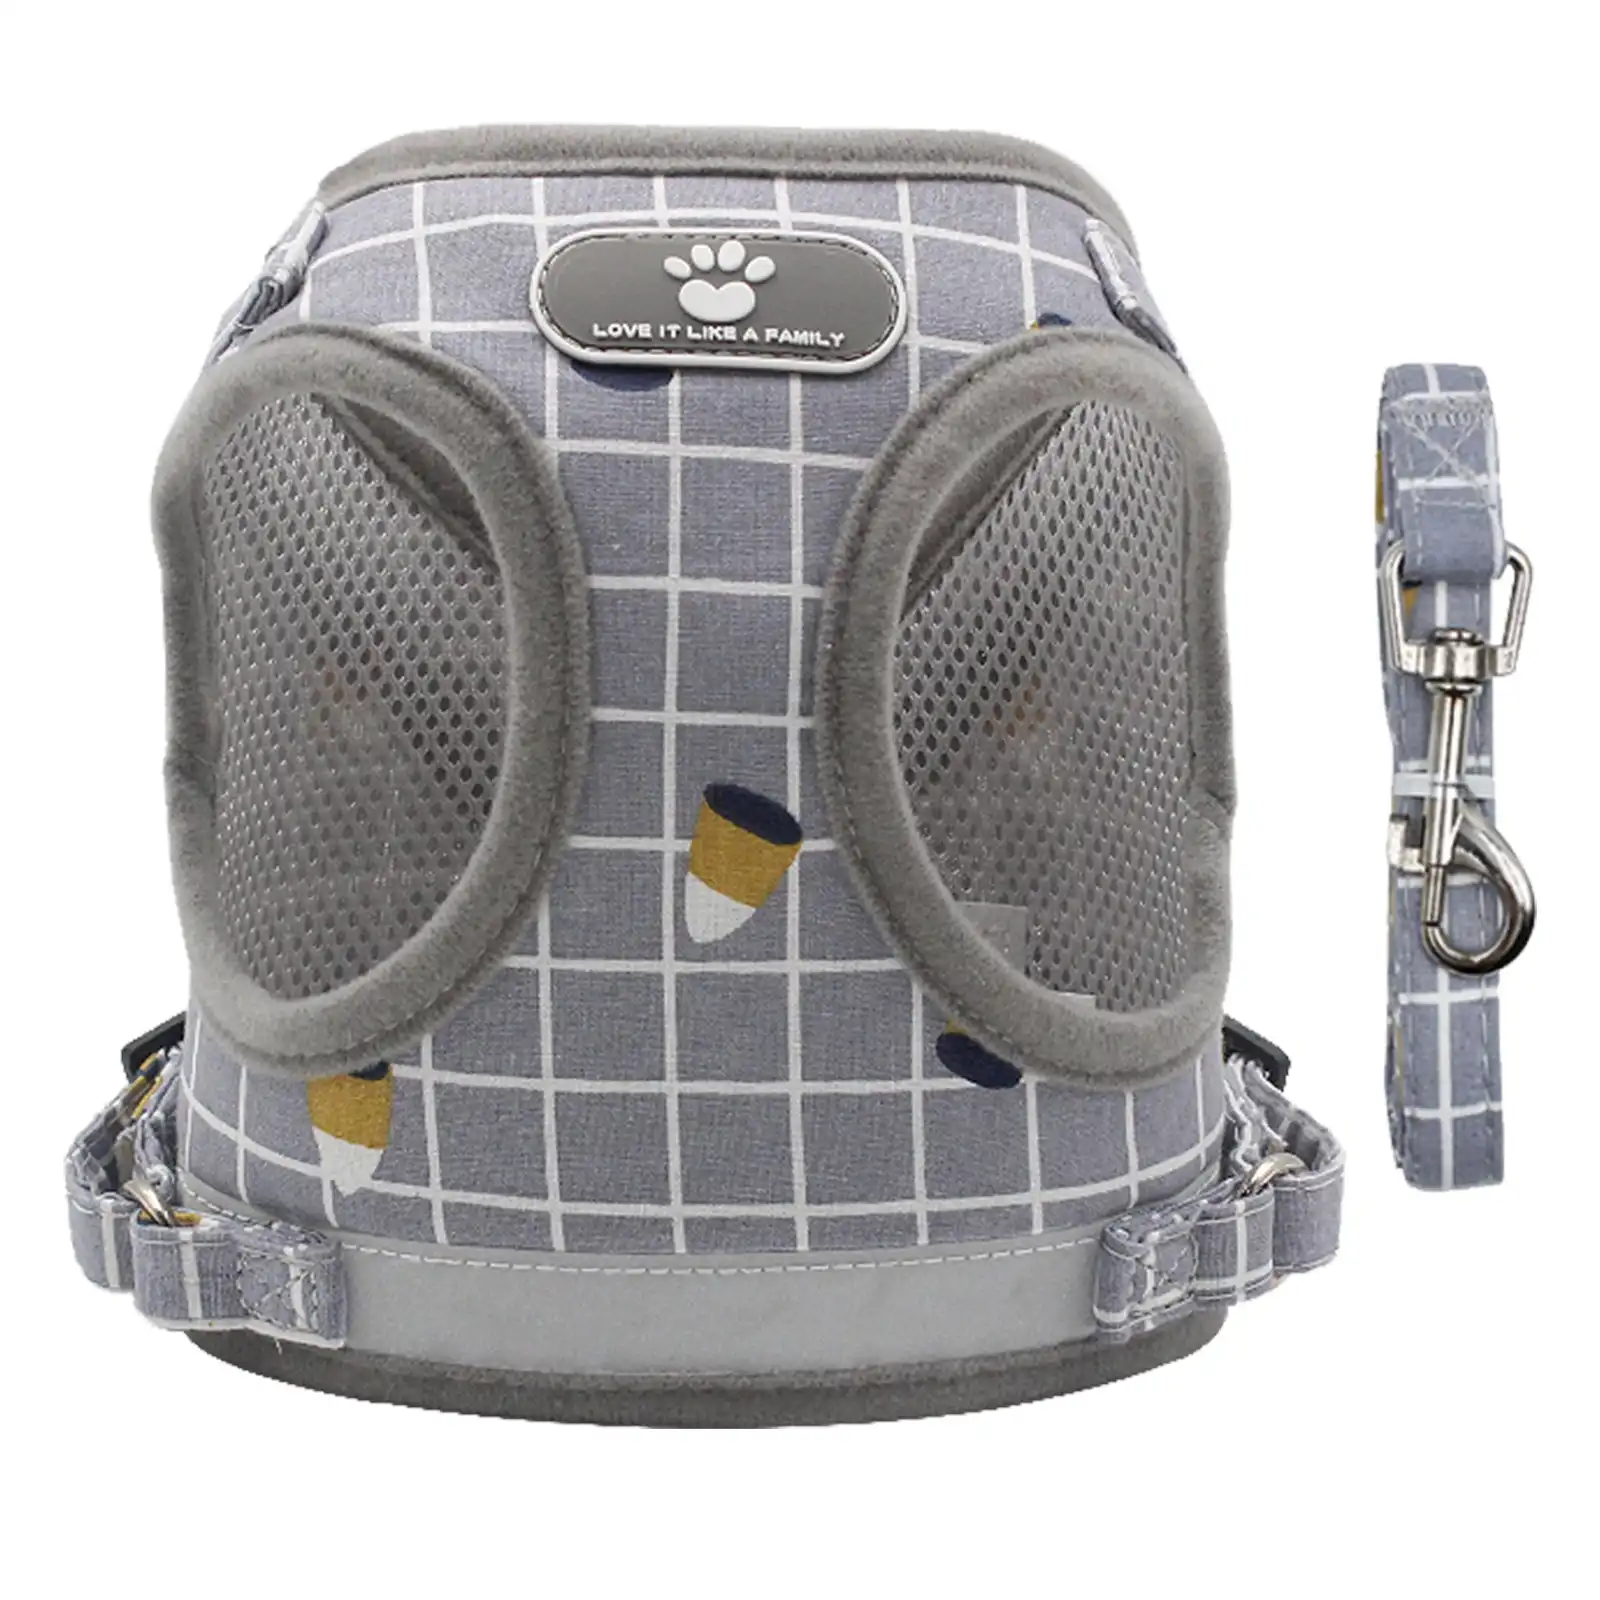 Furbulous No Pull Cat Small Dog Harness and Lead Set Adjustable Reflective Step-in Vest Harnesses Mesh Padded Plaid Escape Proof Puppy Jacket - Grey S